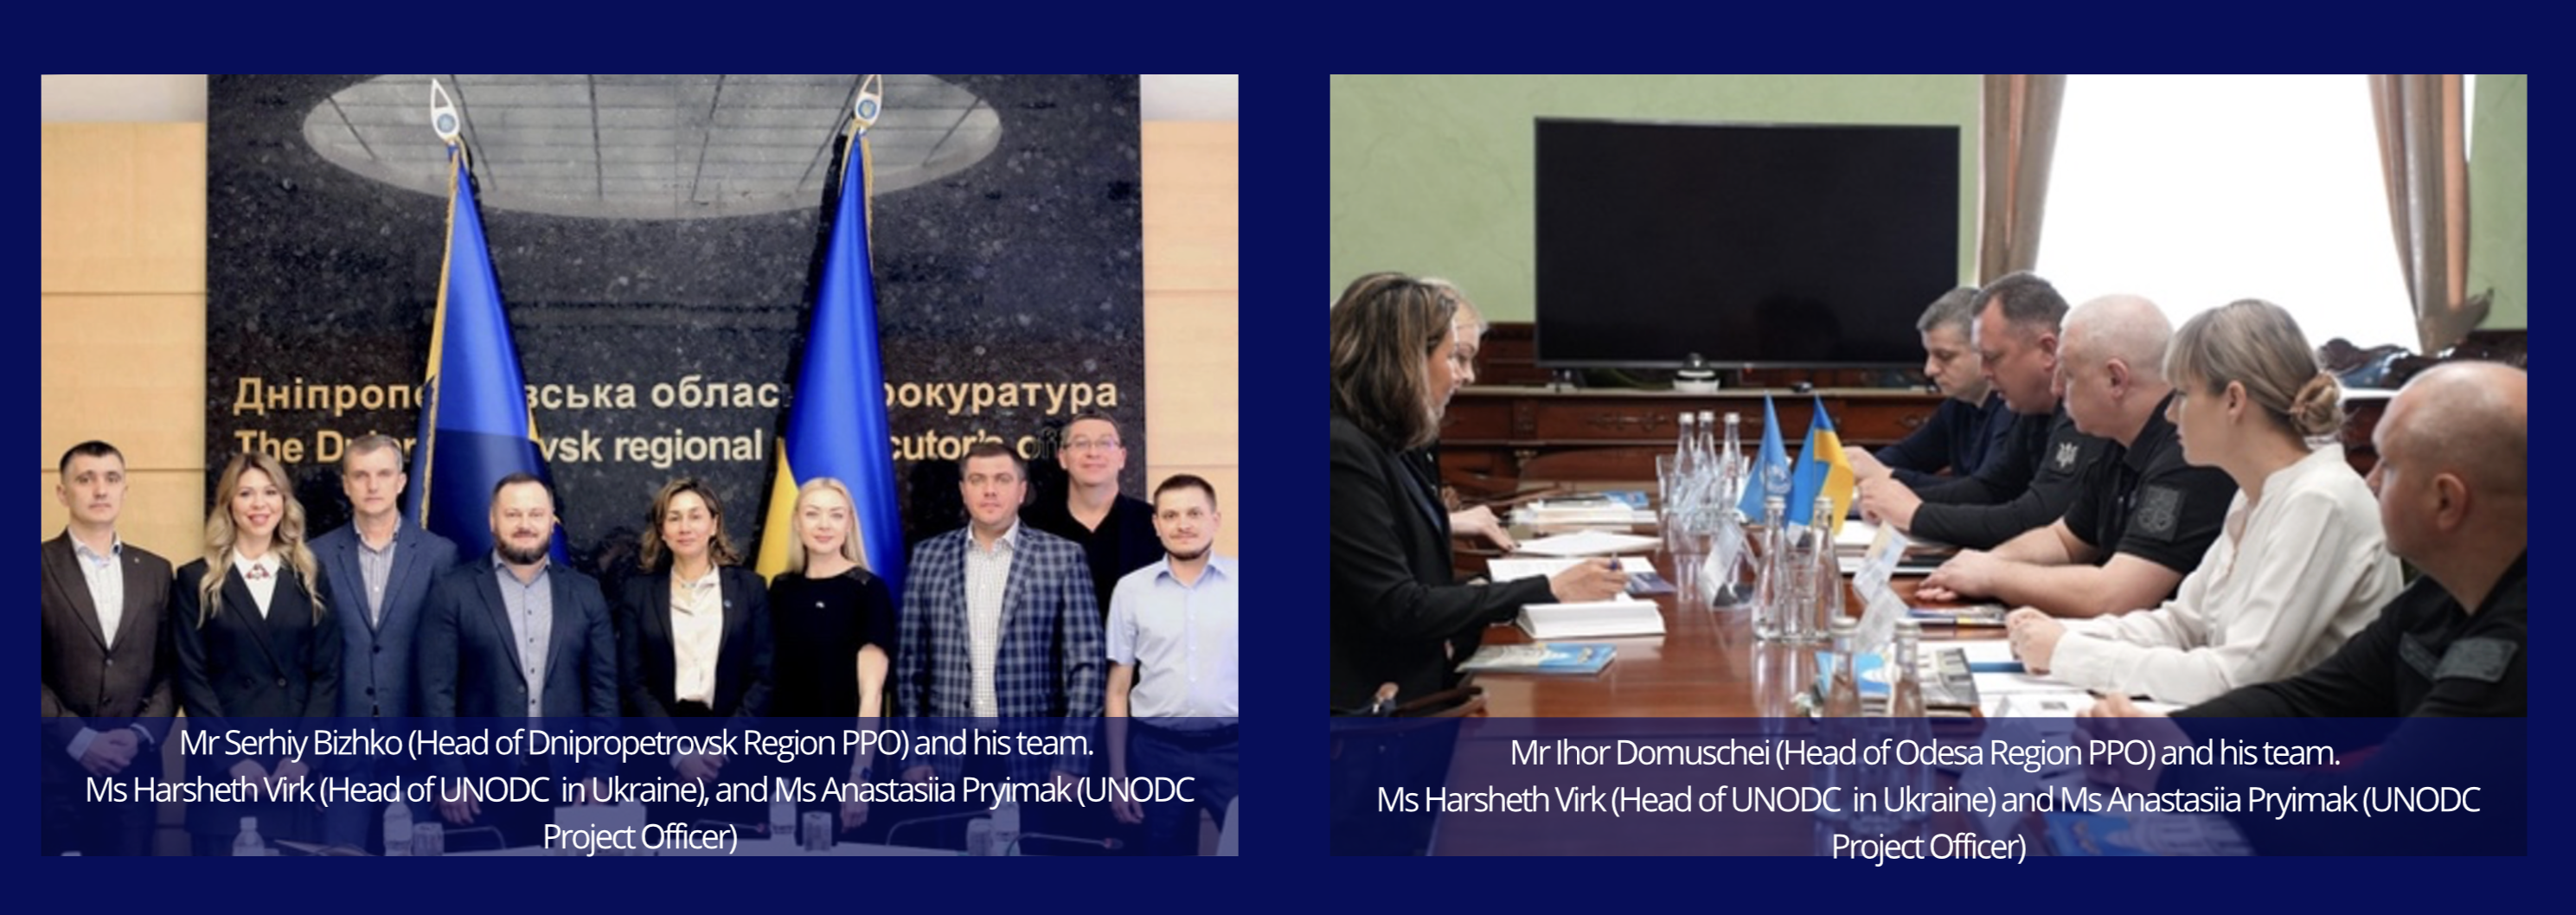 Left: Mr Serhiy Bizhko (Head of Dnipropetrovsk Region PPO) and his team. Ms Harsheth Virk (Head of UNODC in Ukraine) and Ms Anastasiia Pryimak (UNODC Project Officer) / Right: Mr Ihor Domuschei (Head of Odesa Region PPO) and his team.  Ms Harsheth Virk (Head of UNODC  in Ukraine) and Ms Anastasiia Pryimak (UNODC Project Officer)